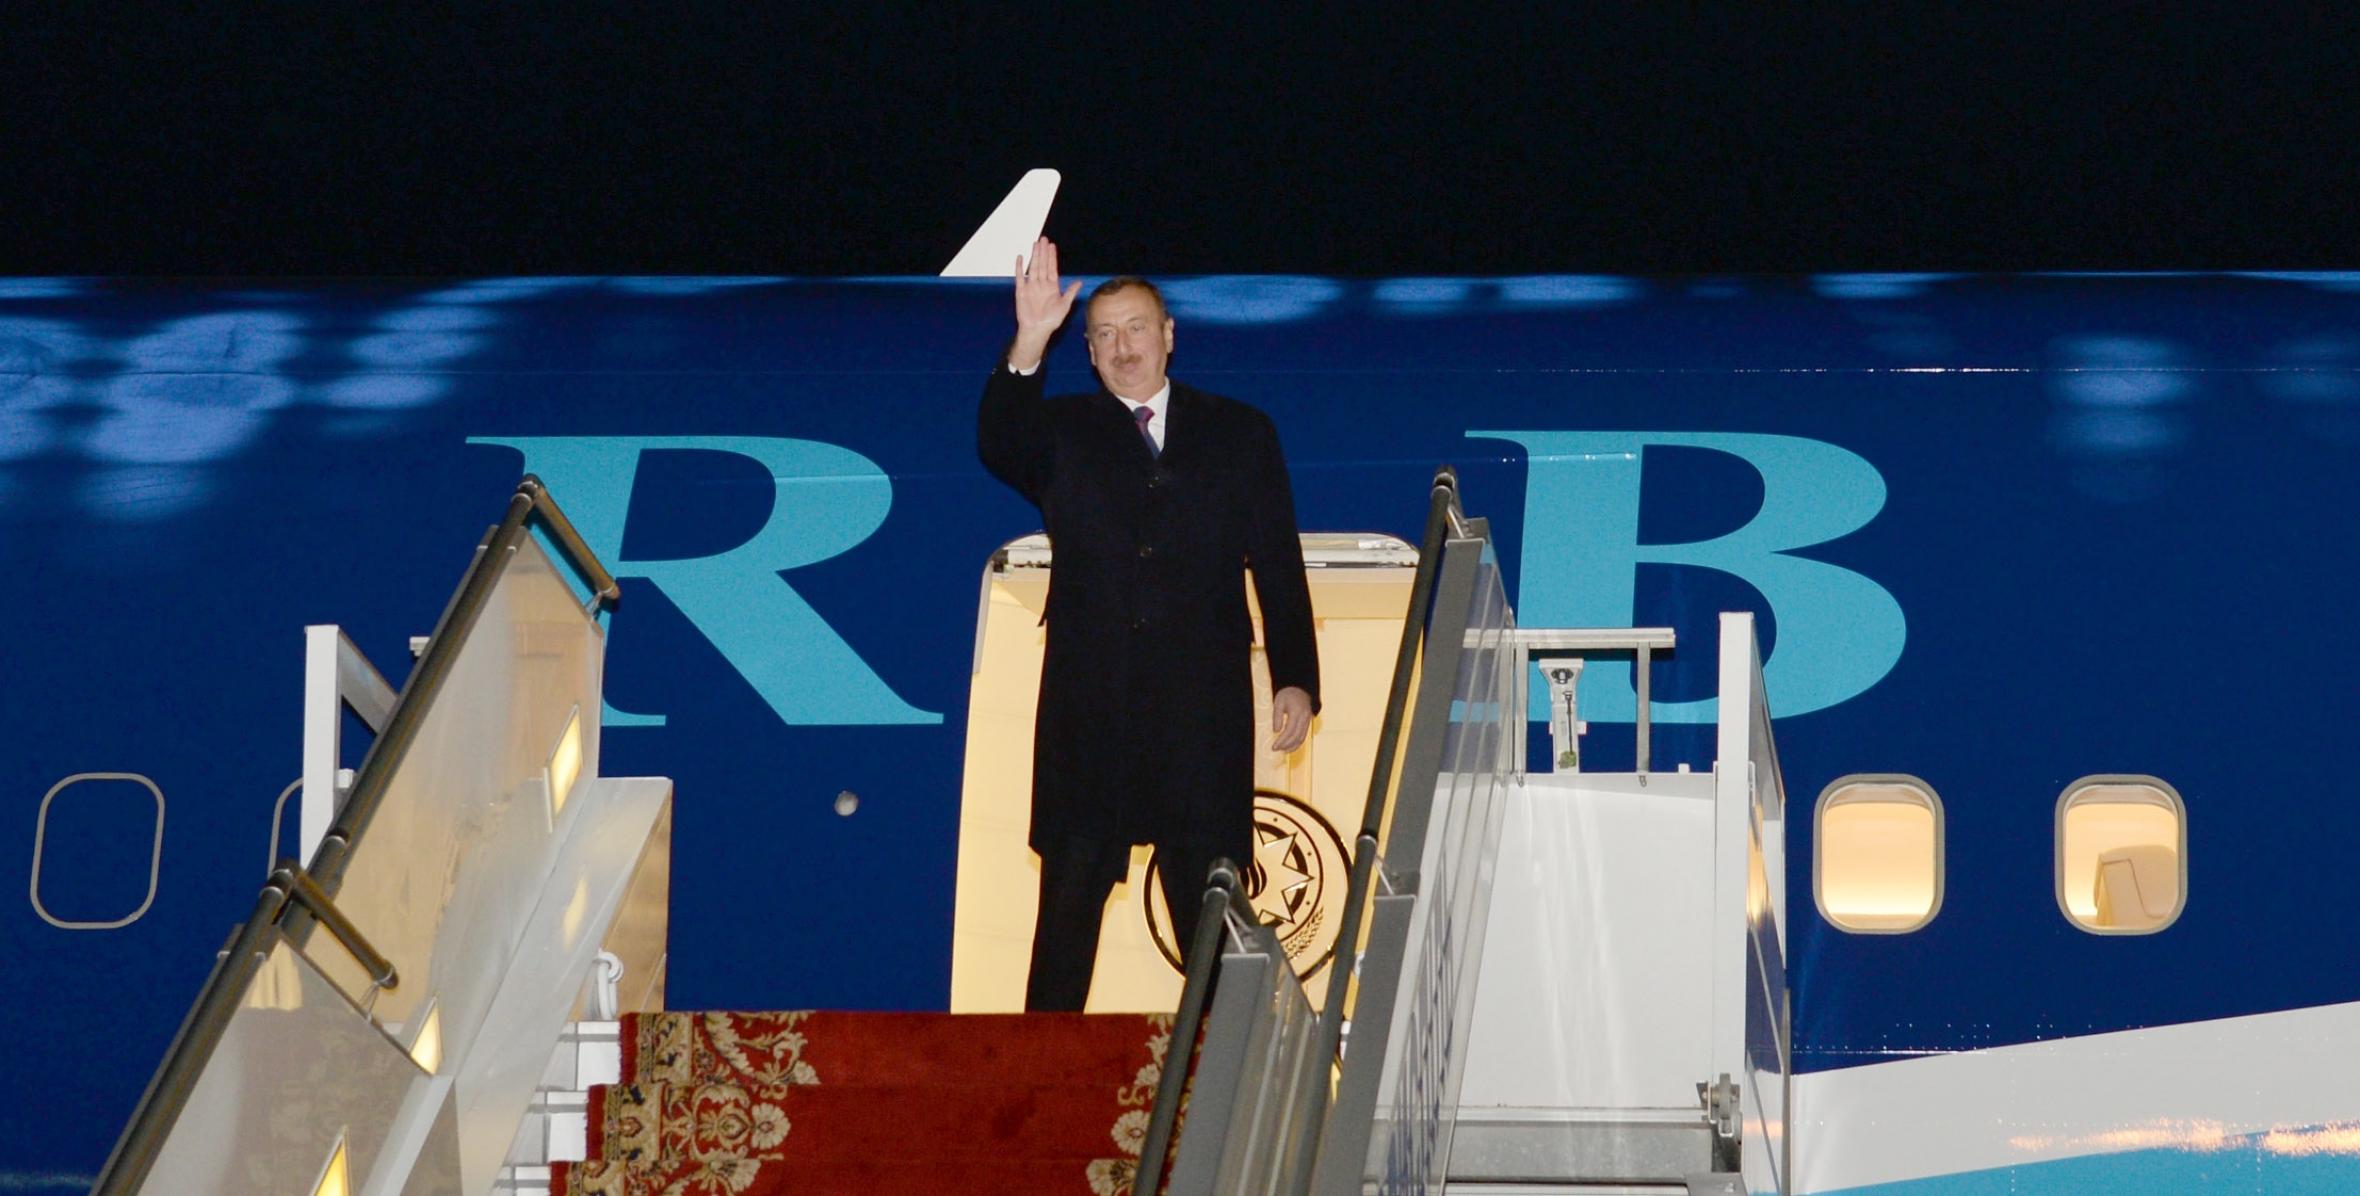 Ilham Aliyev’s official visit to Ukraine has ended